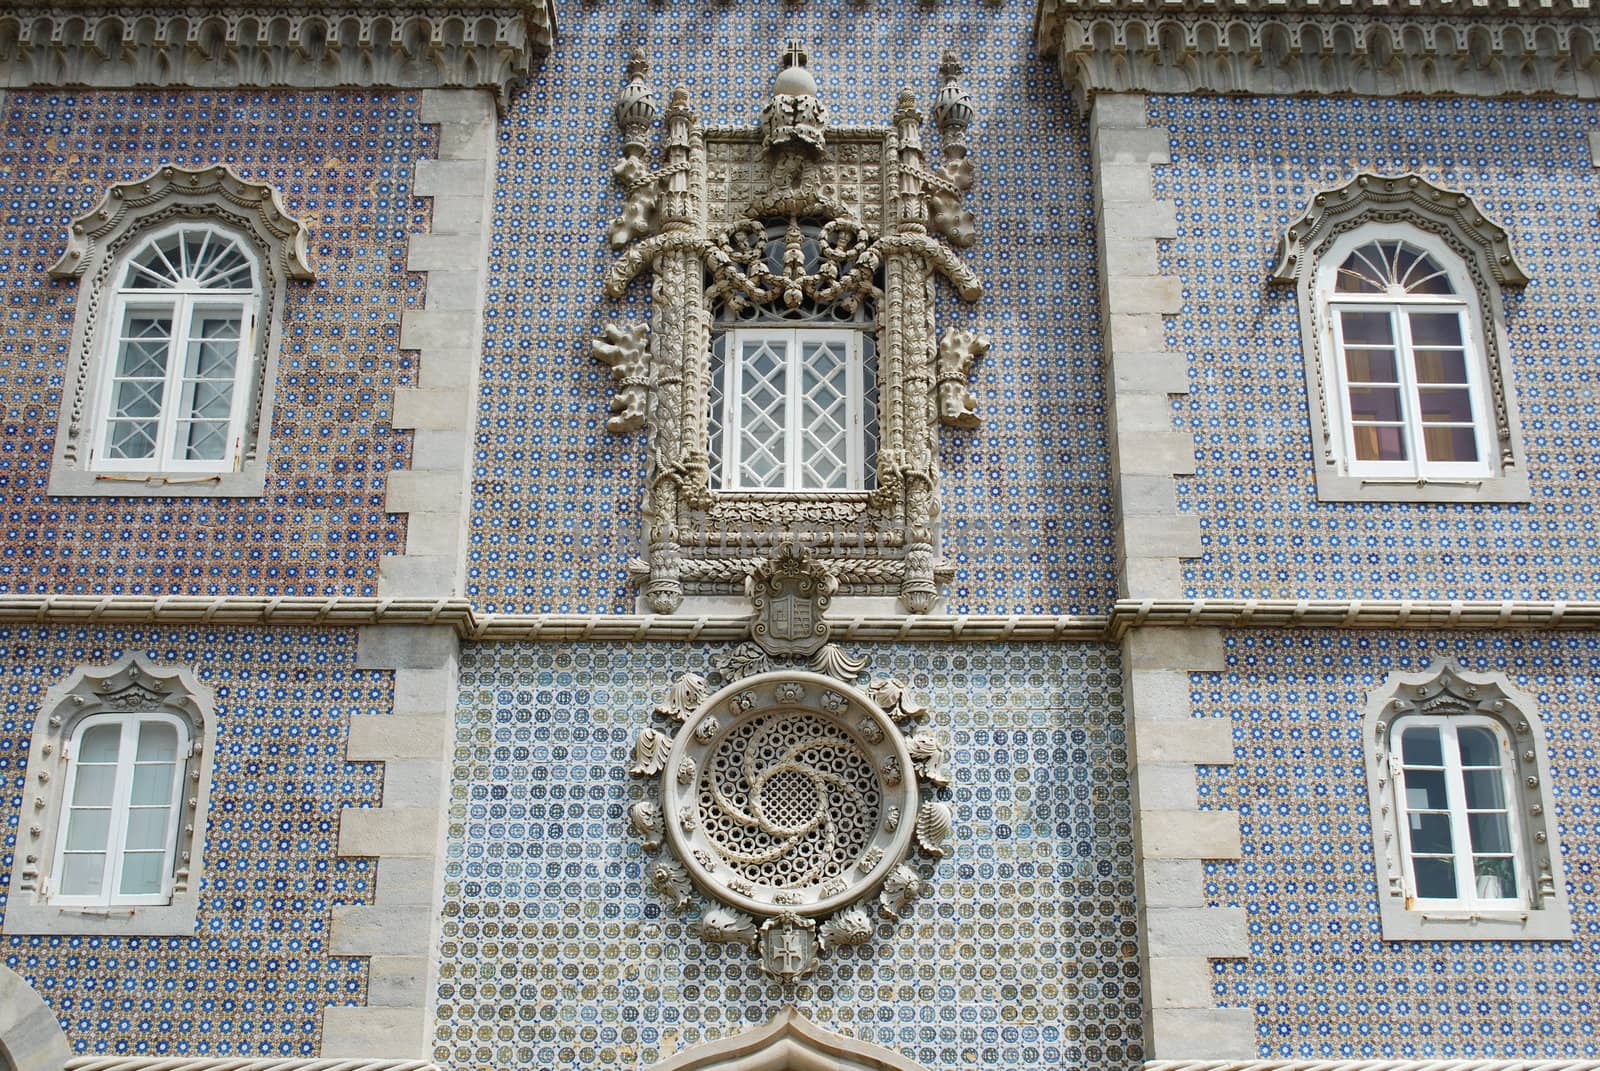 Architectural details in Palace of Pena in Sintra by luissantos84